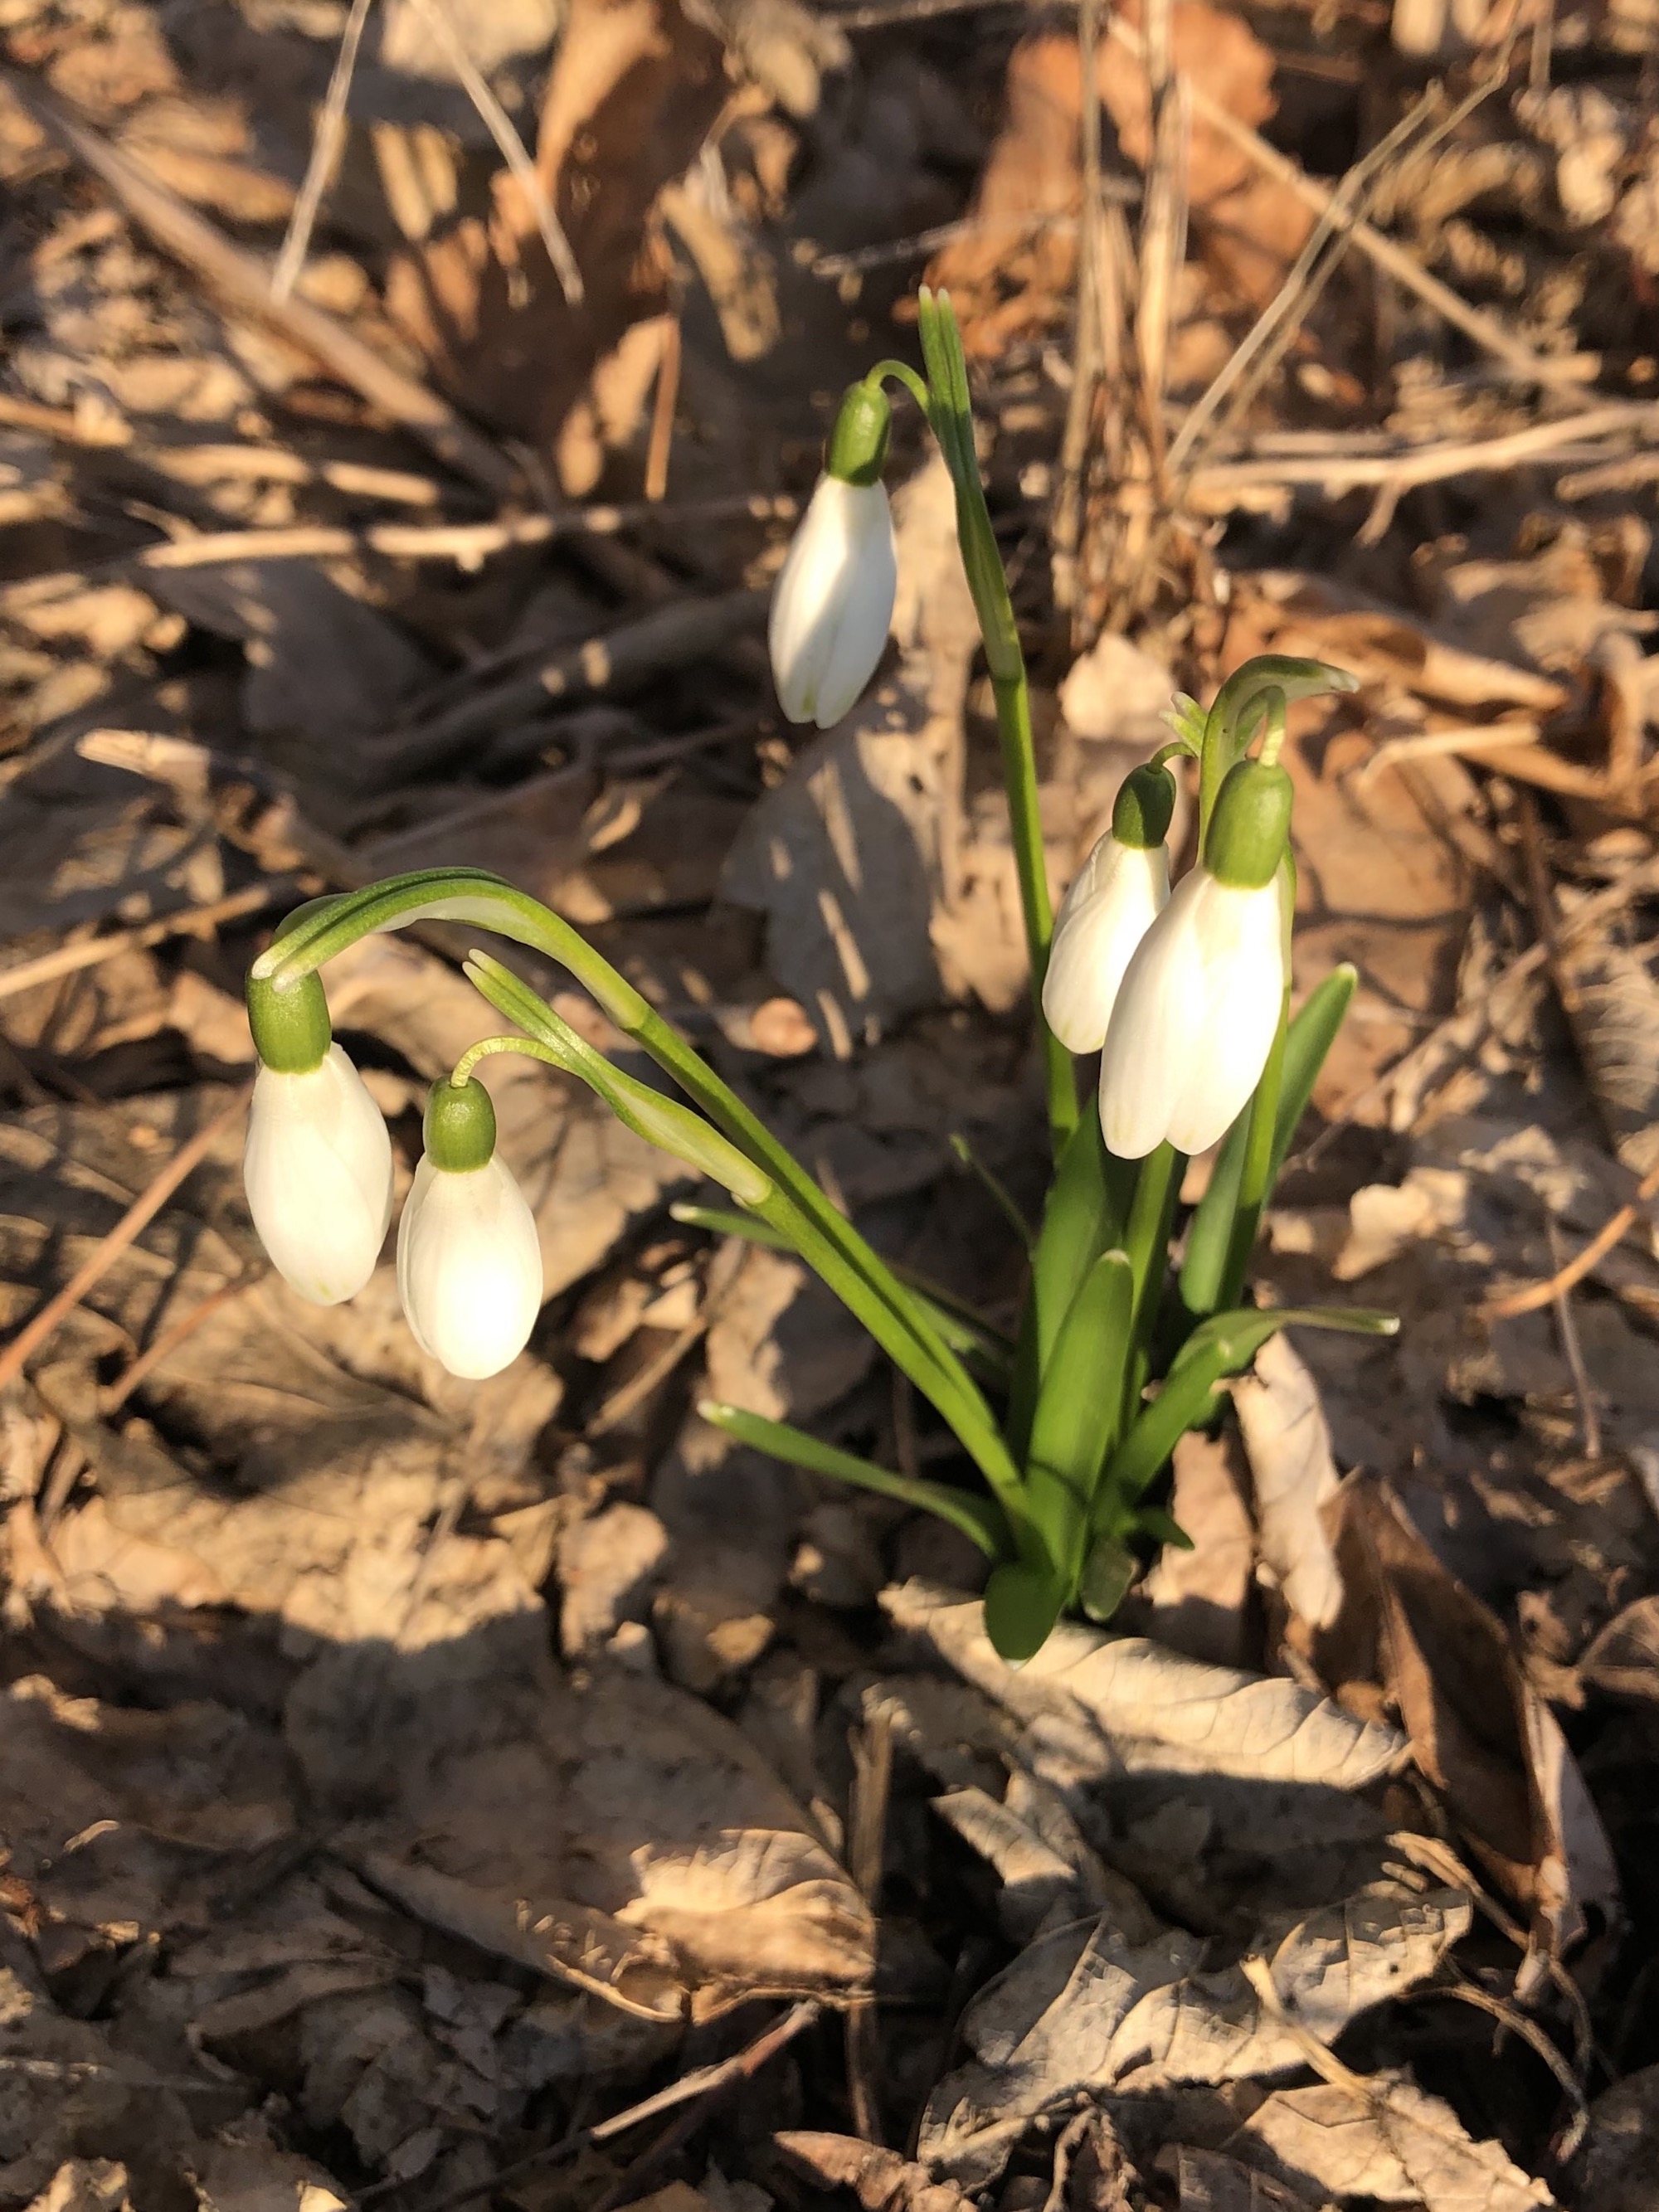 Snowdrops emerging in Madison Wisconsin along Arbor Drive on March 12, 2021.